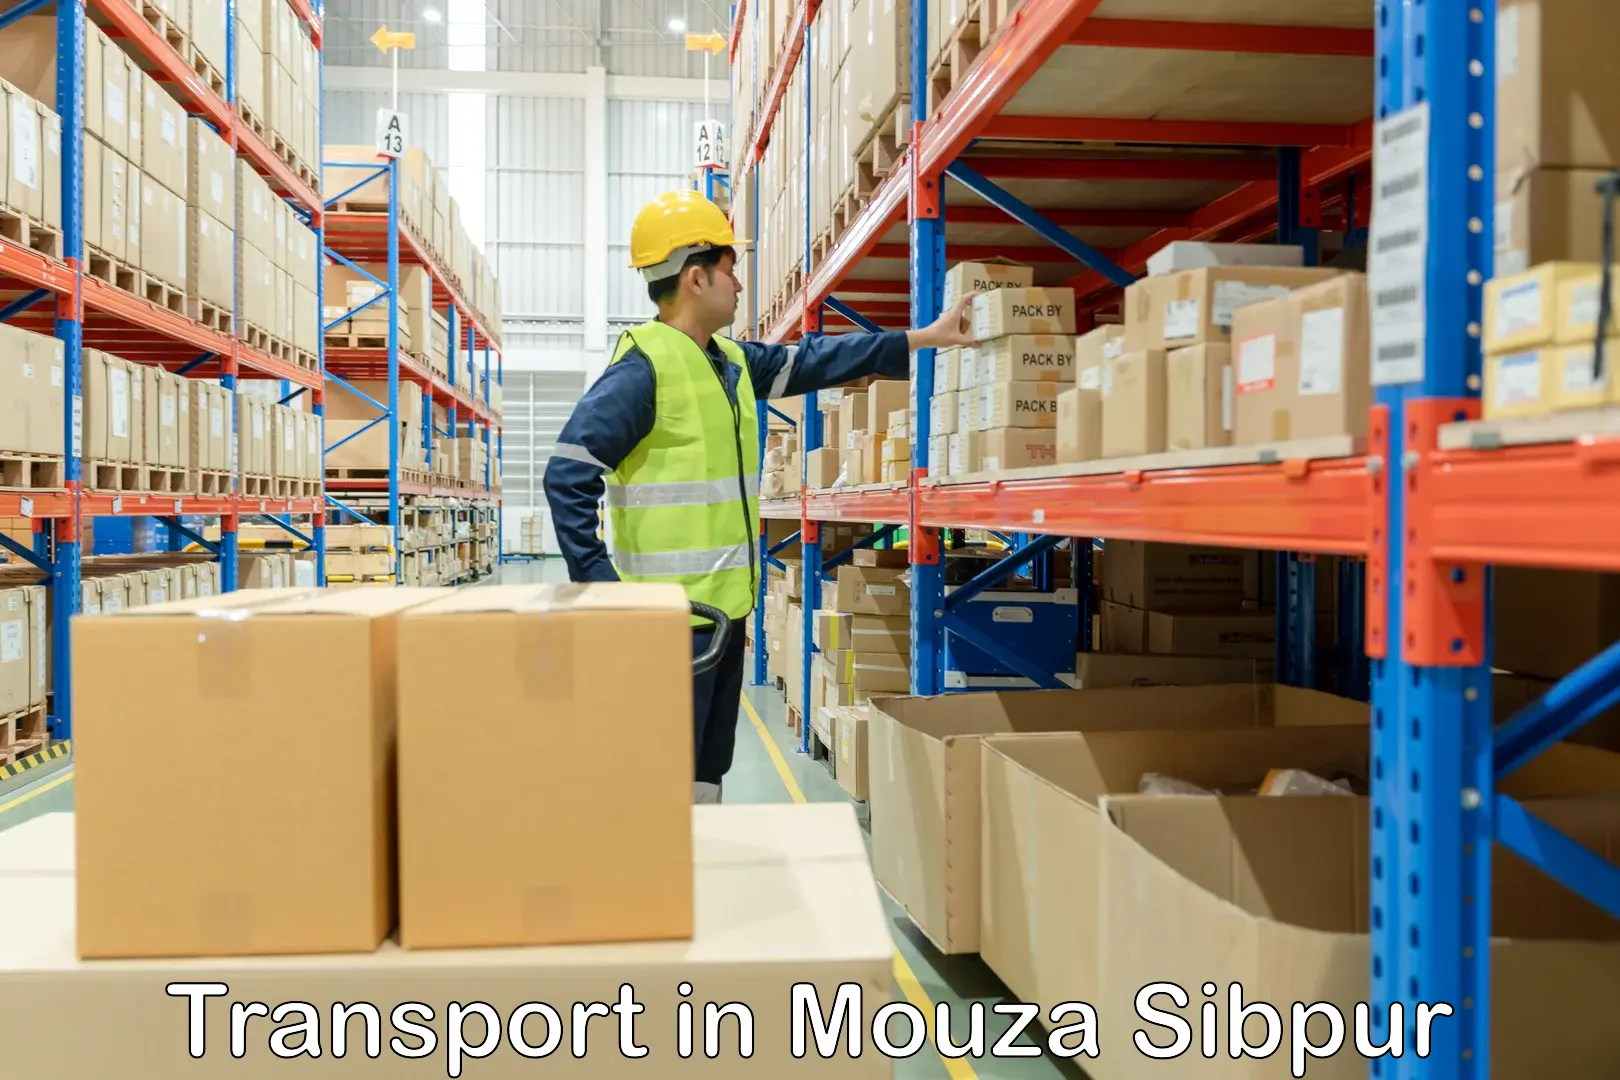 Container transport service in Mouza Sibpur